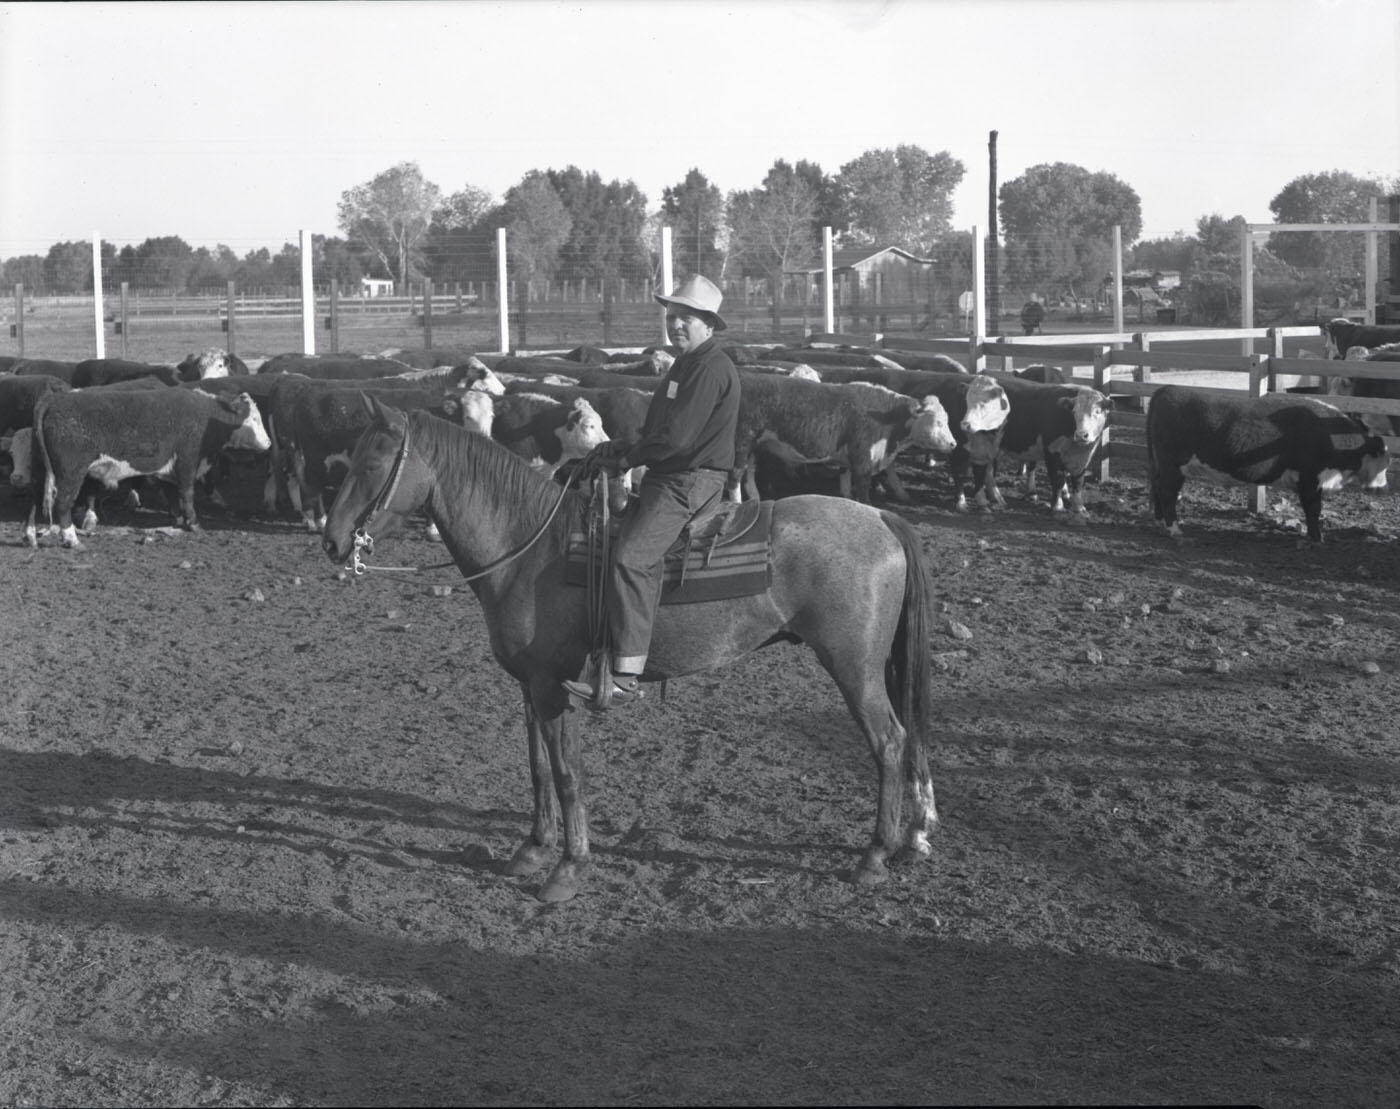 Man on Horse in Cattle Lot, 1944